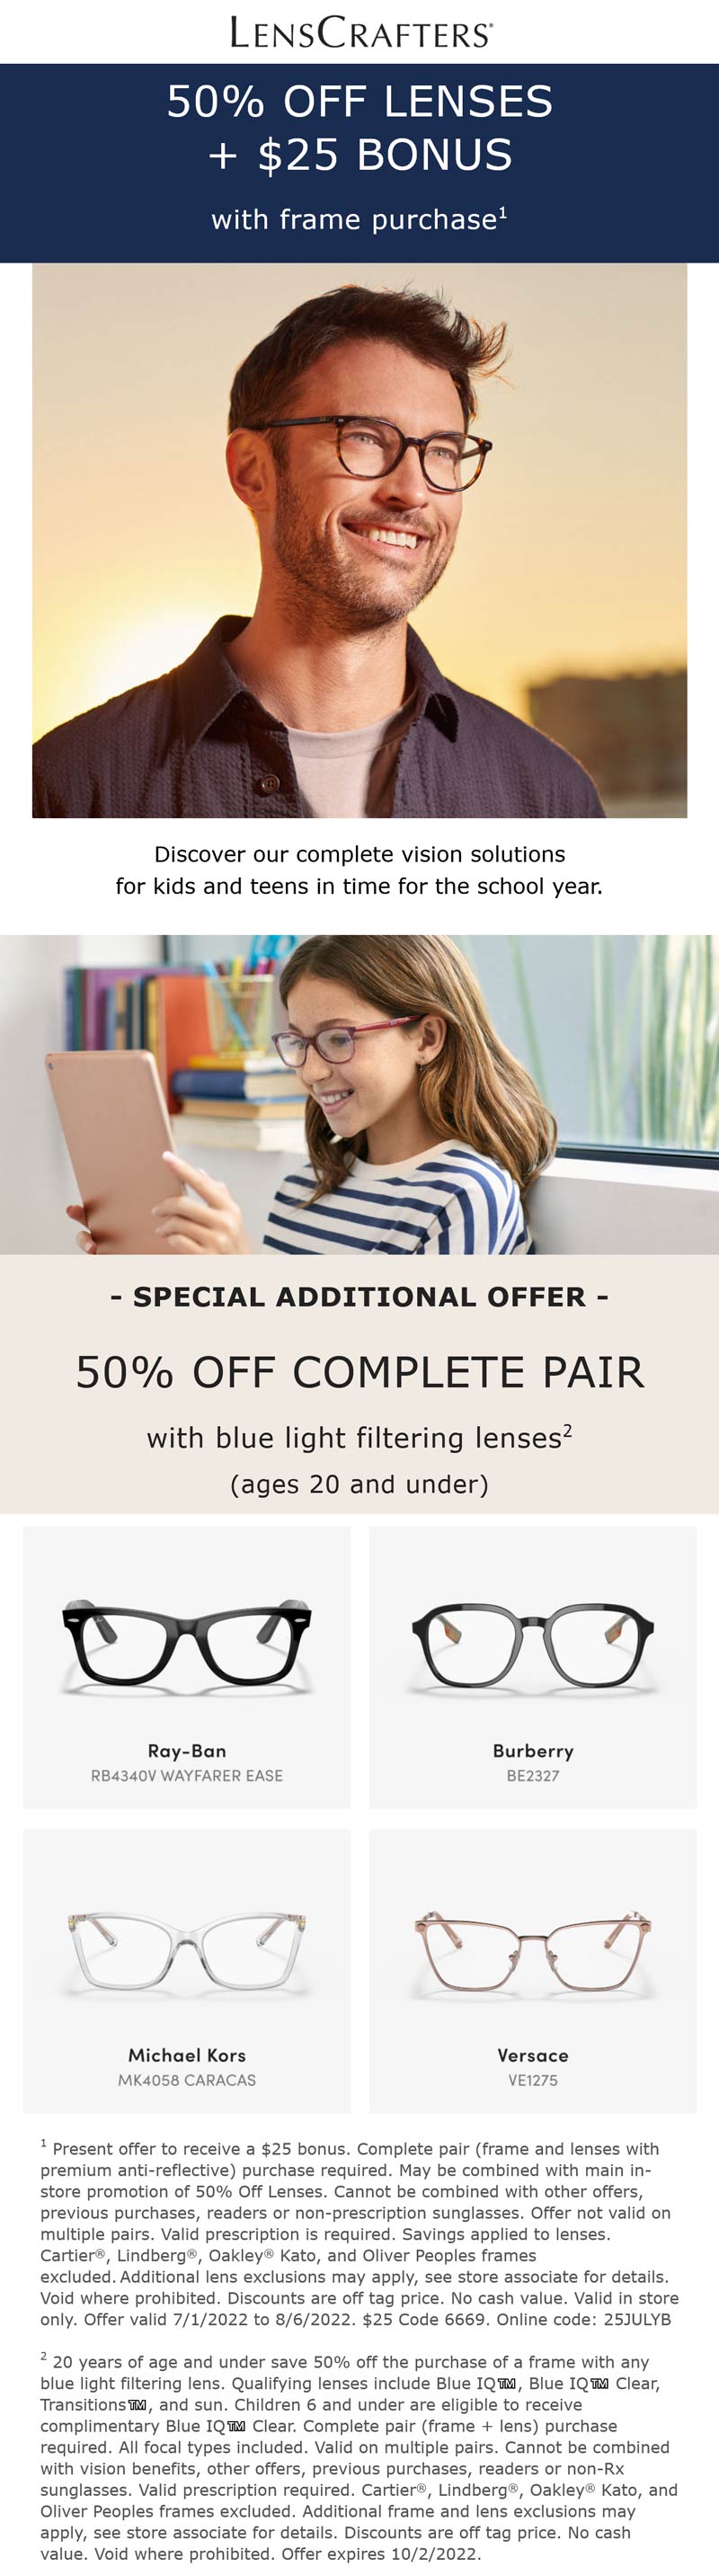 Lenscrafters coupons & promo code for [December 2022]